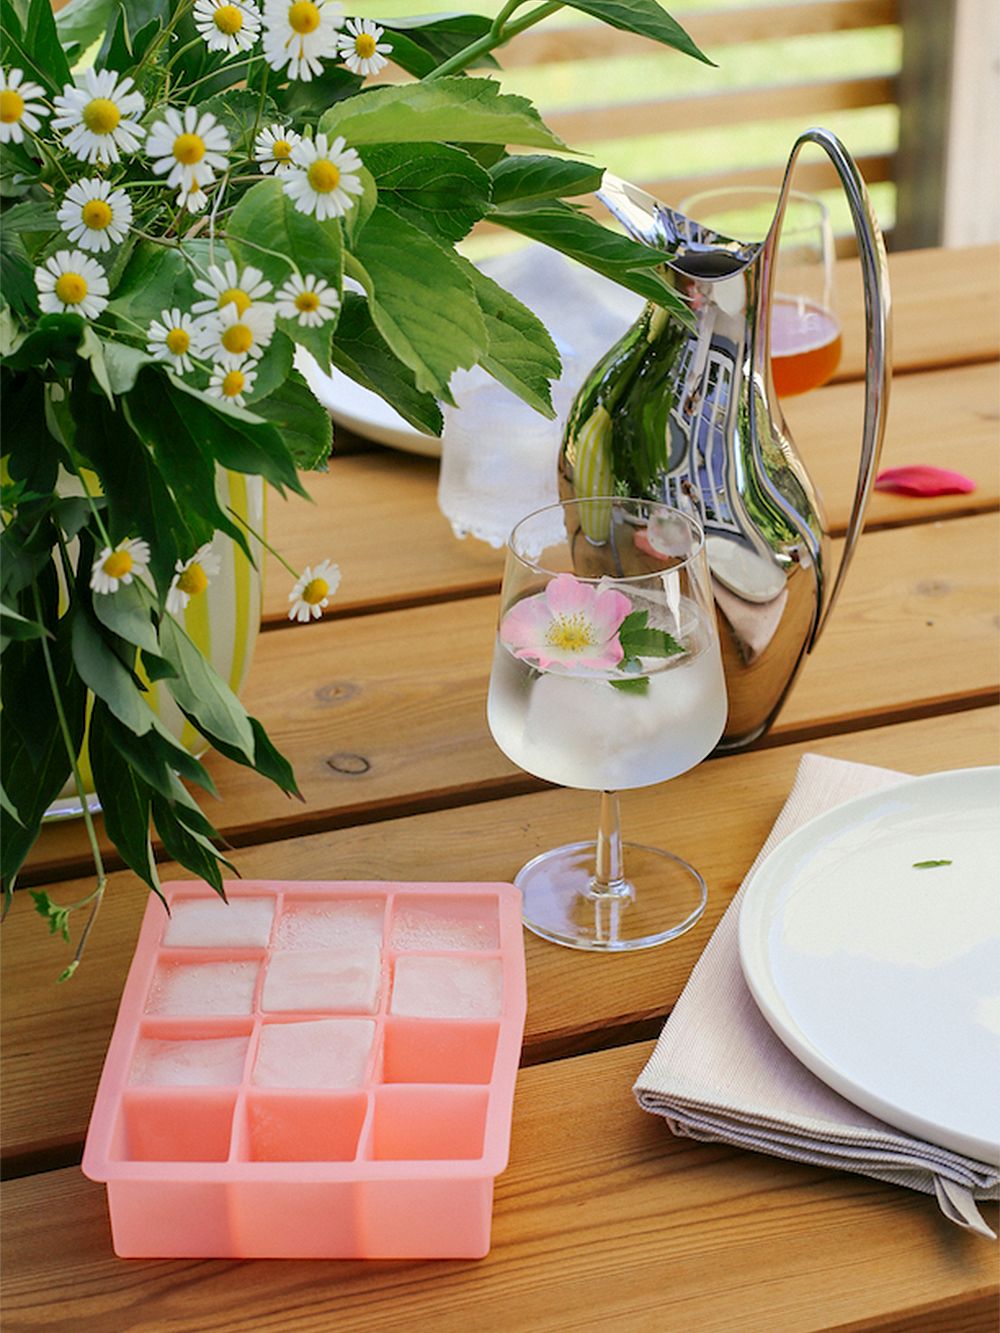 An image of a summery table setting, as part of the summer house decor.